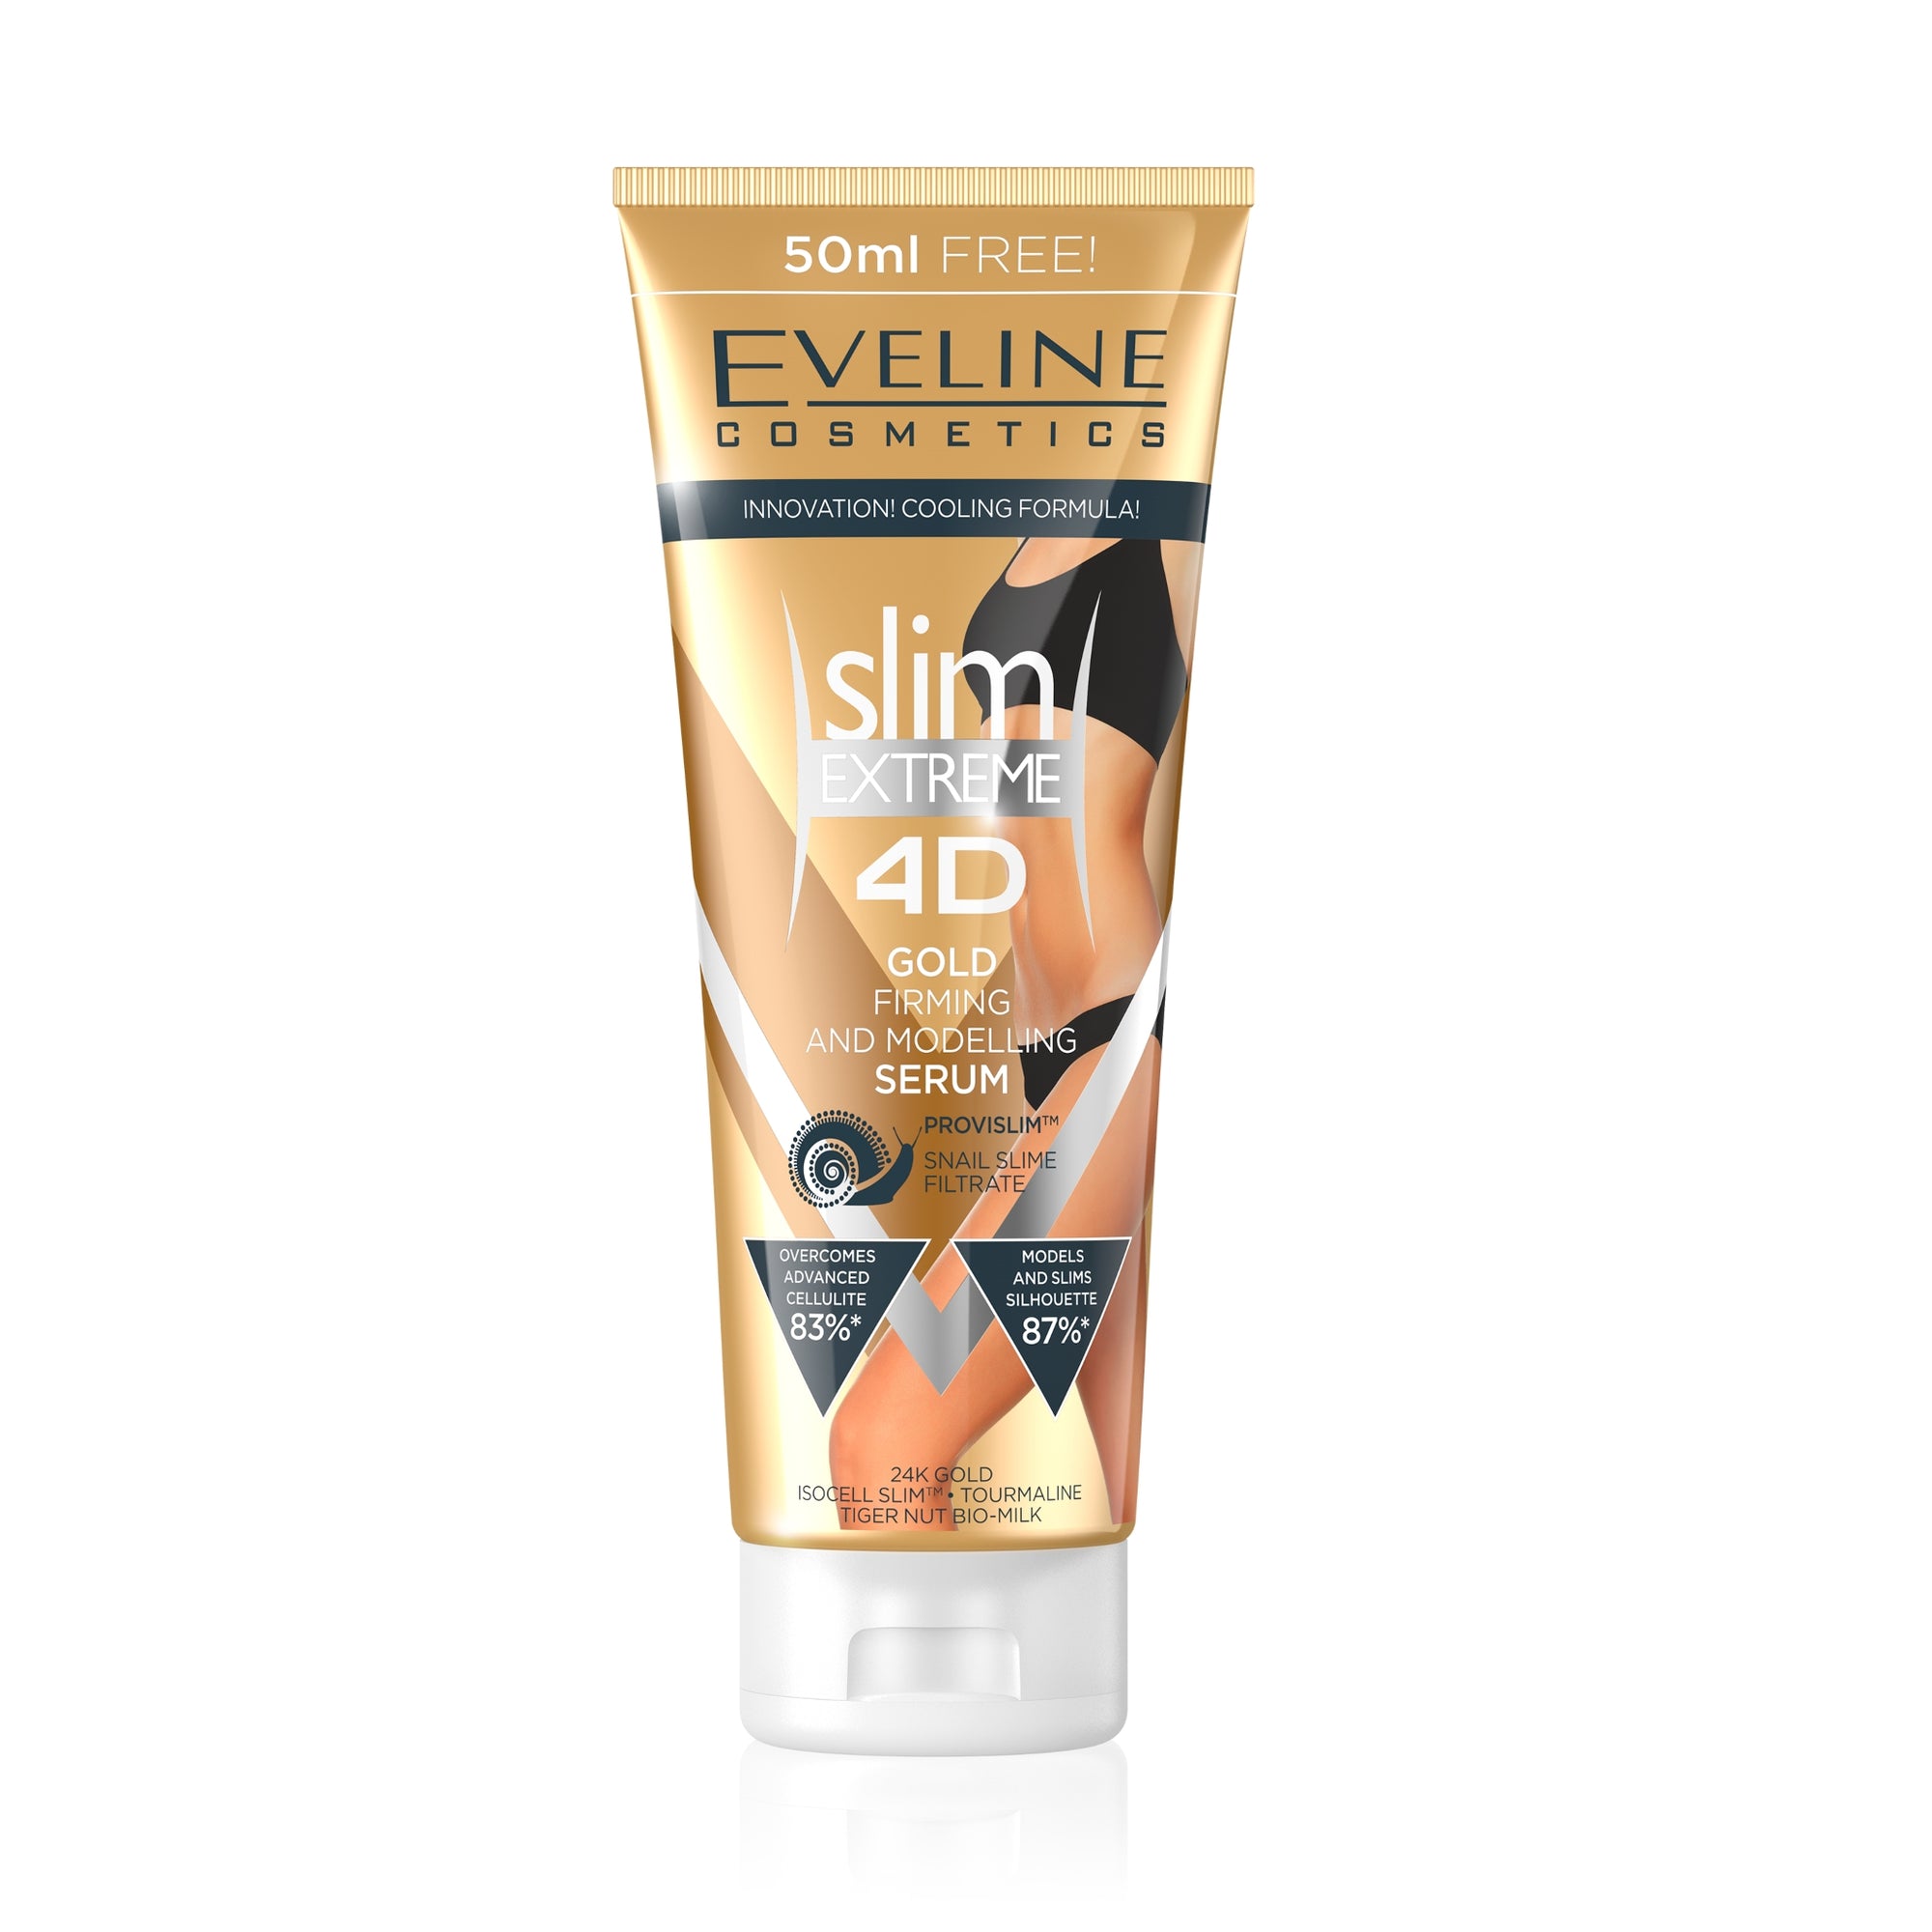 Eveline Brazilian Body Shimmer for Body with Gold Dust 150ml